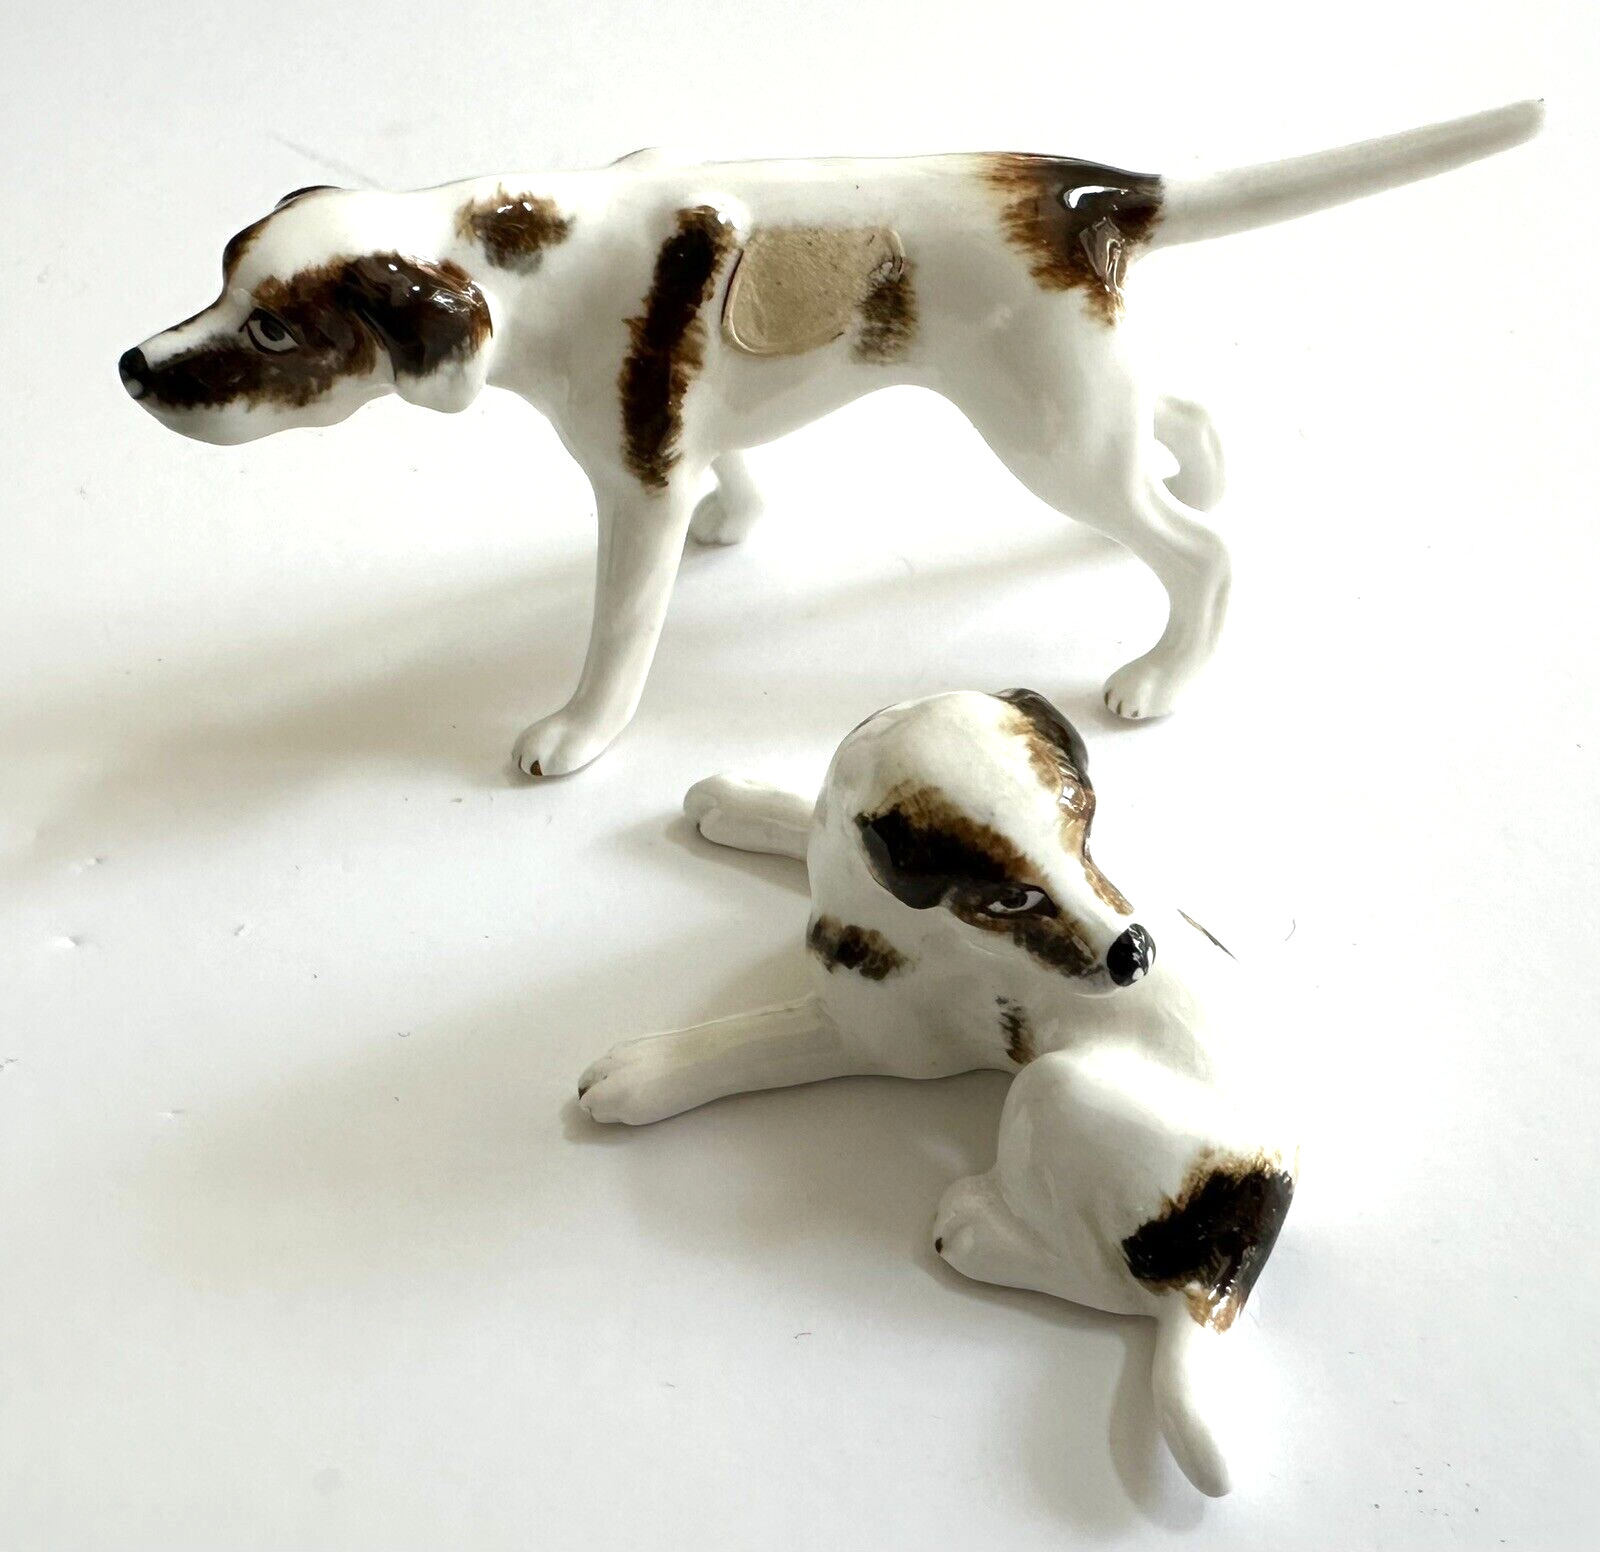 Pair of English Pointer Dogs Figurines